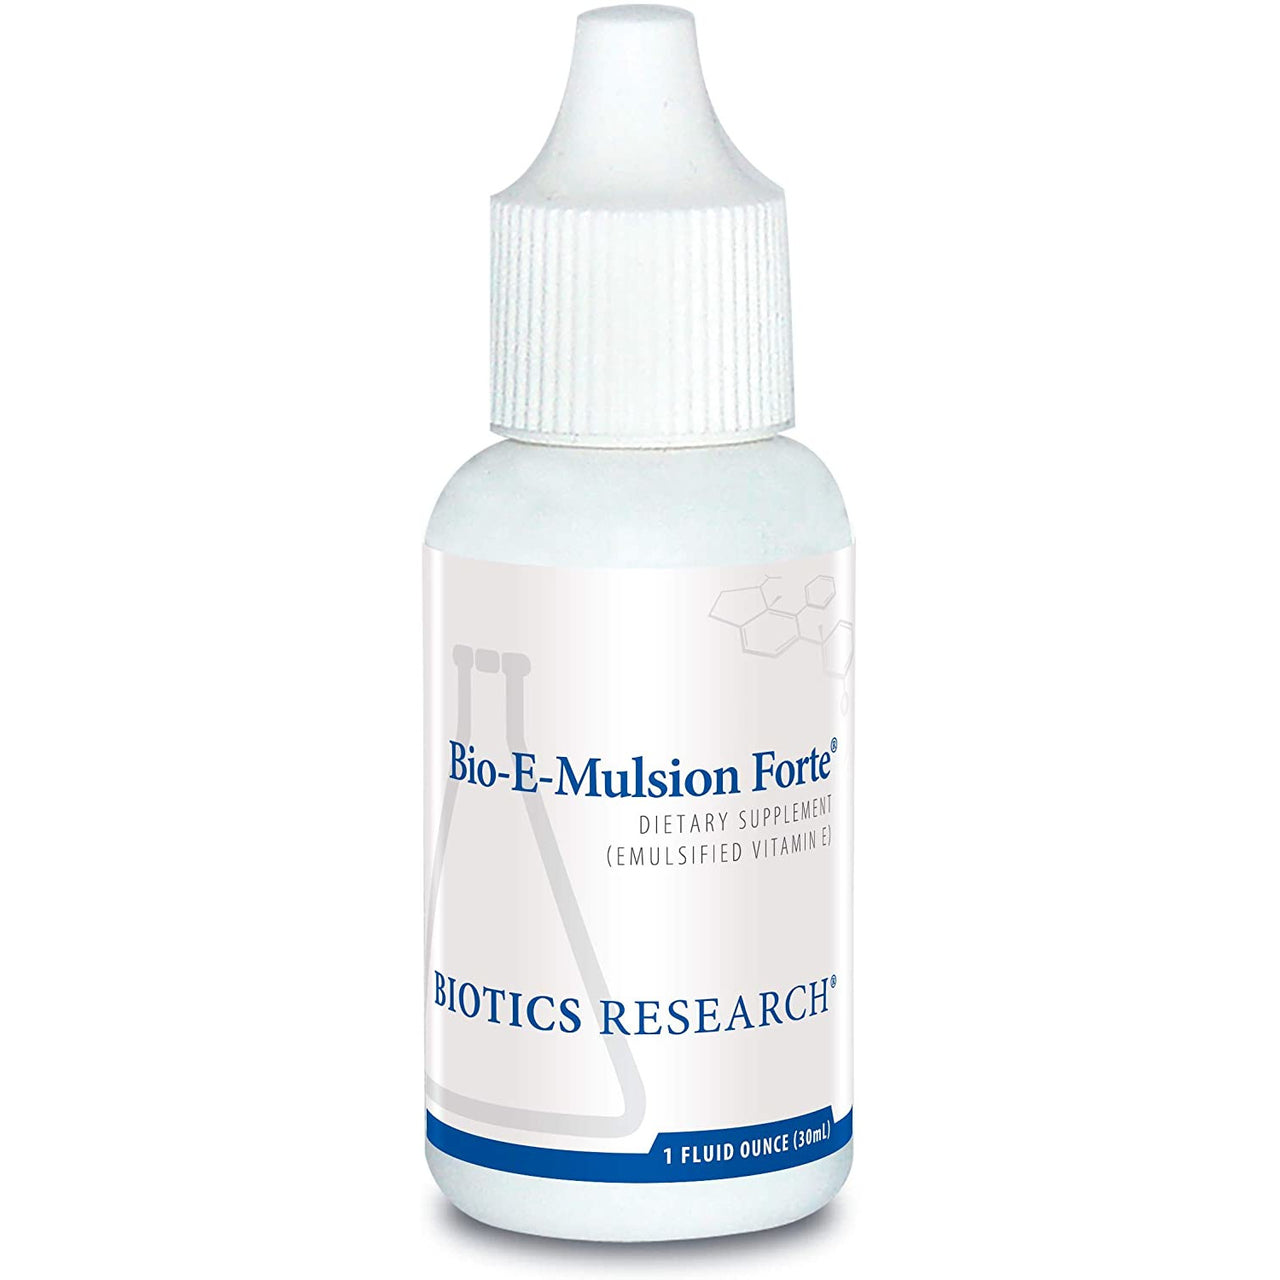 Bio E Mulsion Forte - Biotics Research - Vitamin E, Emulsified, Supports Cell Function, Potent Antioxidant Supports Immune Function